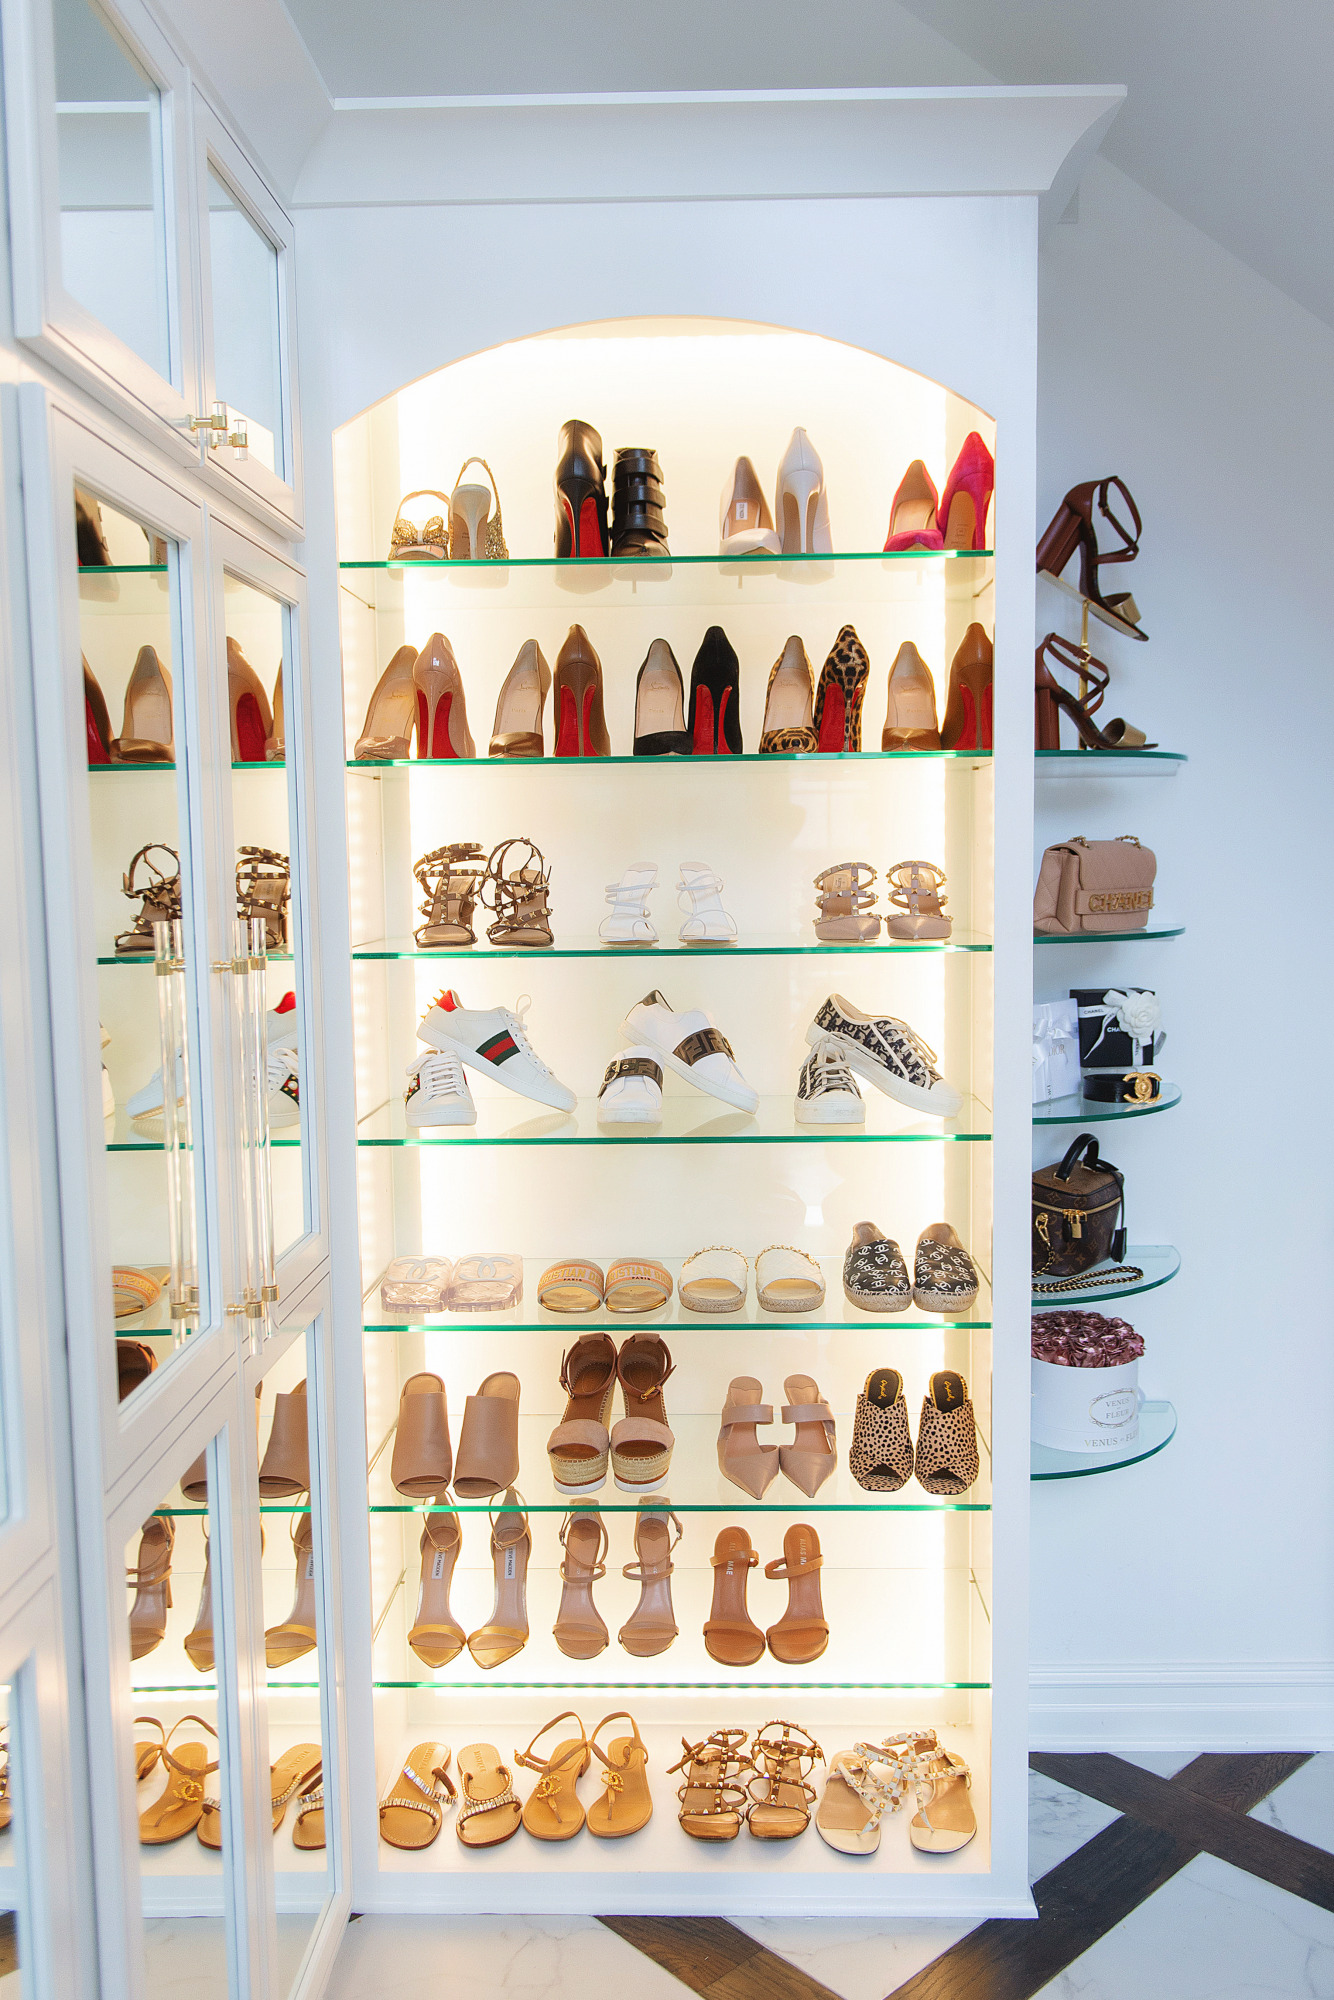 Blog Design by popular US lifestyle blog, The Sweetest Thing: image of a shoe display filled with Christian Louboutain heels, Steve Madden heels, and other designer shoes. 